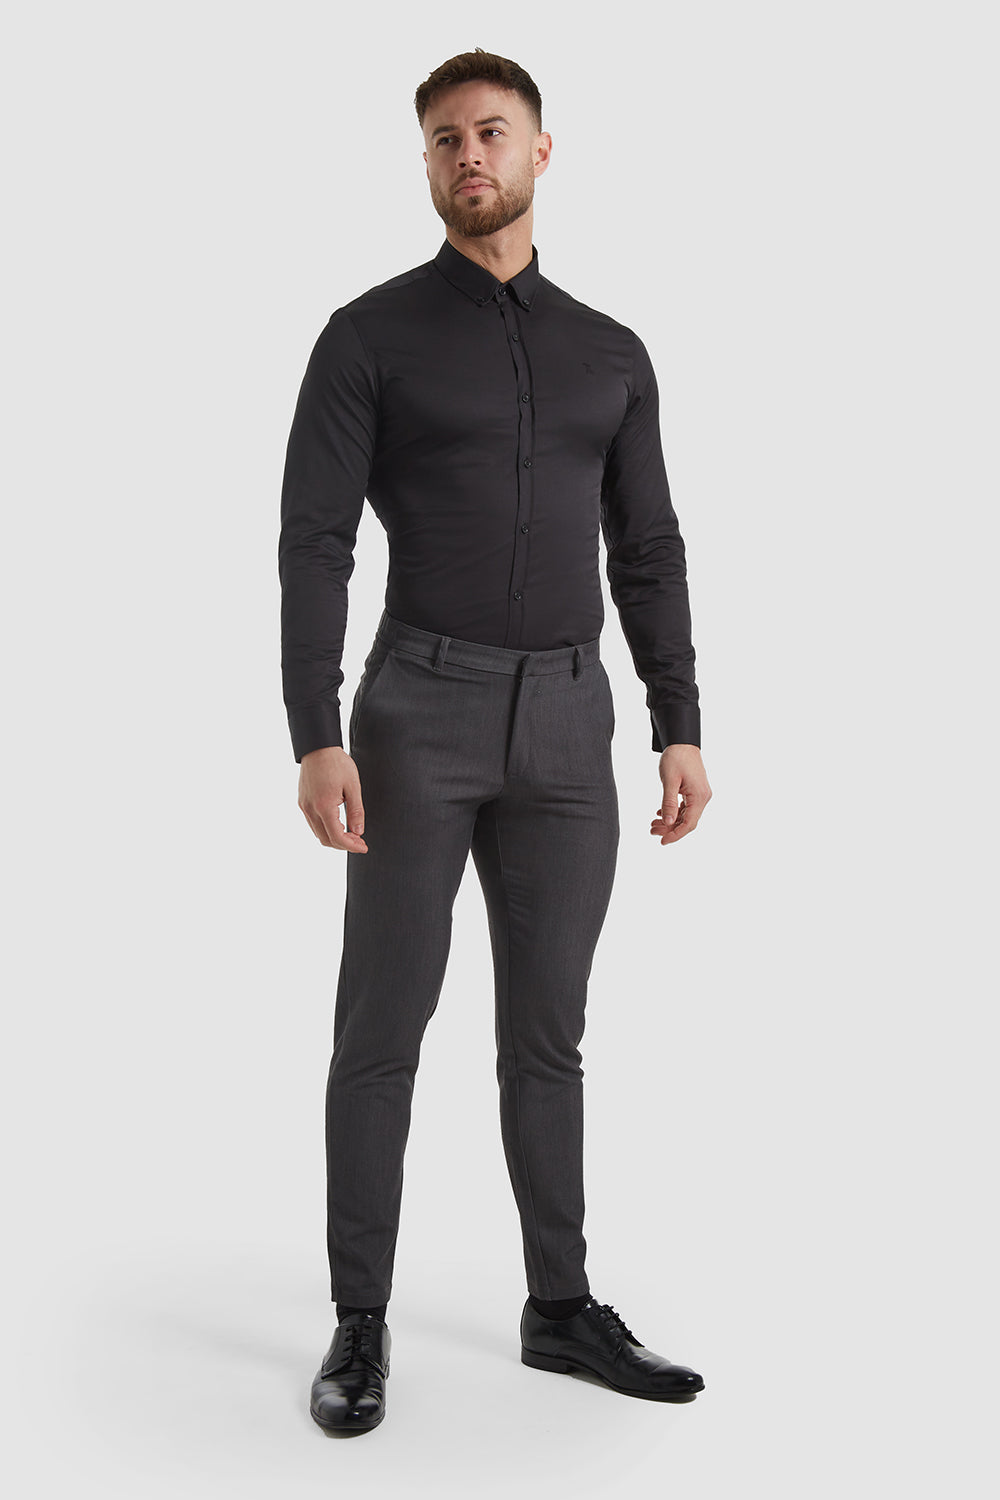 Types of Athletic Pants: What's The Best Option? - TAILORED ATHLETE - USA